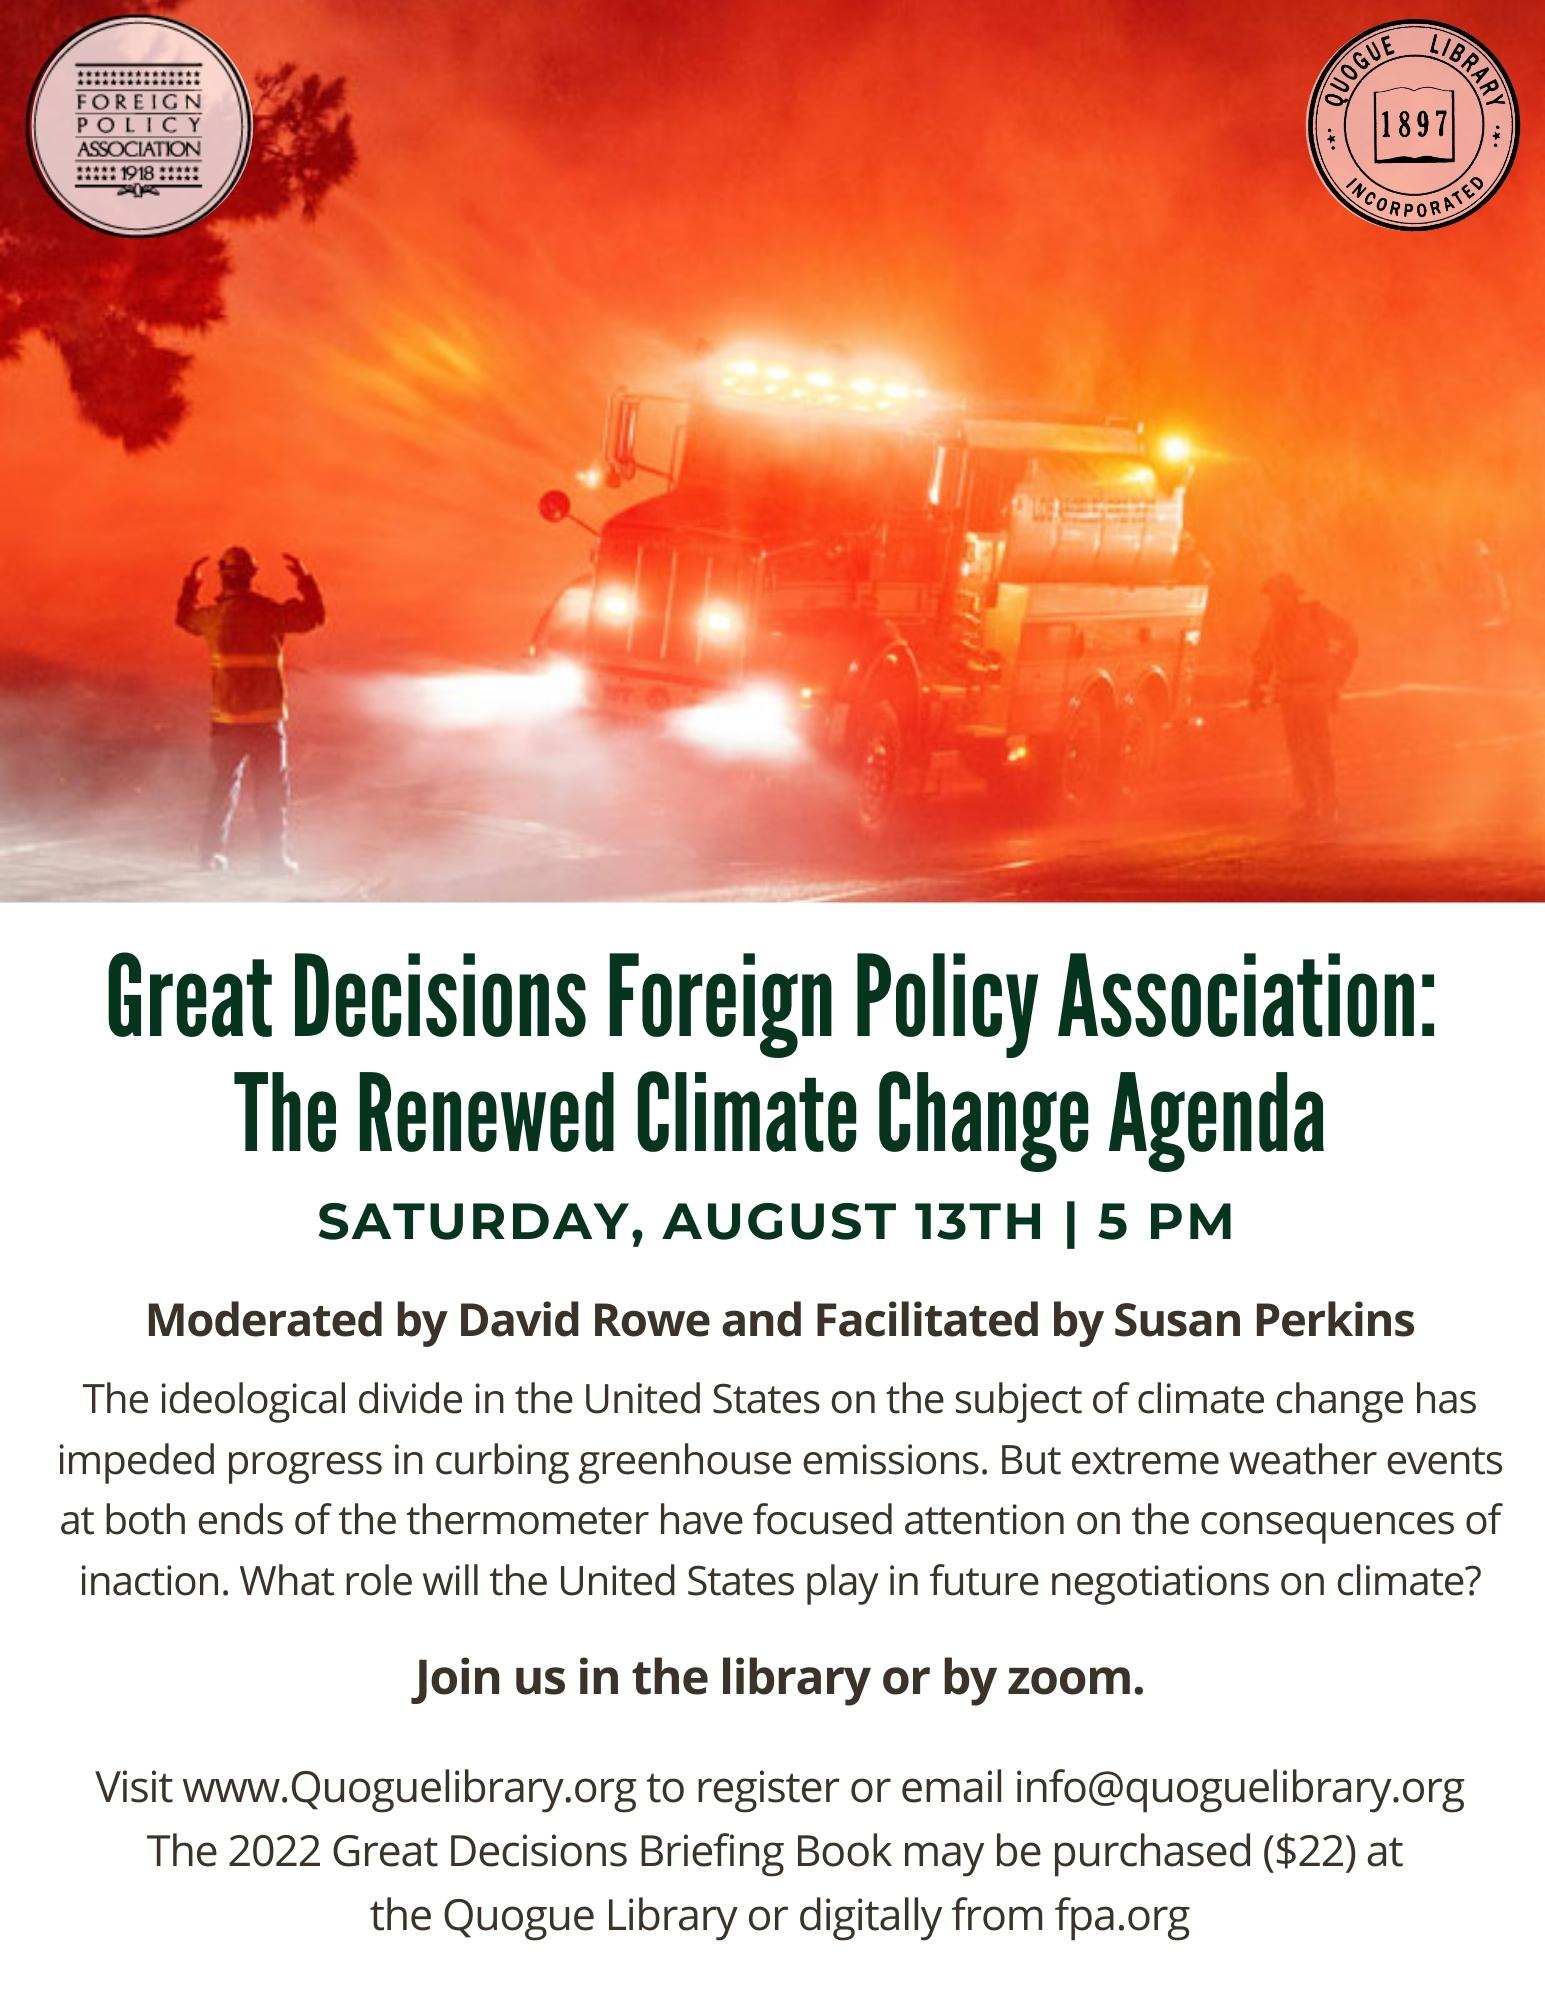 Great Decisions Foreign Policy Association: The Renewed Climate Change Agenda